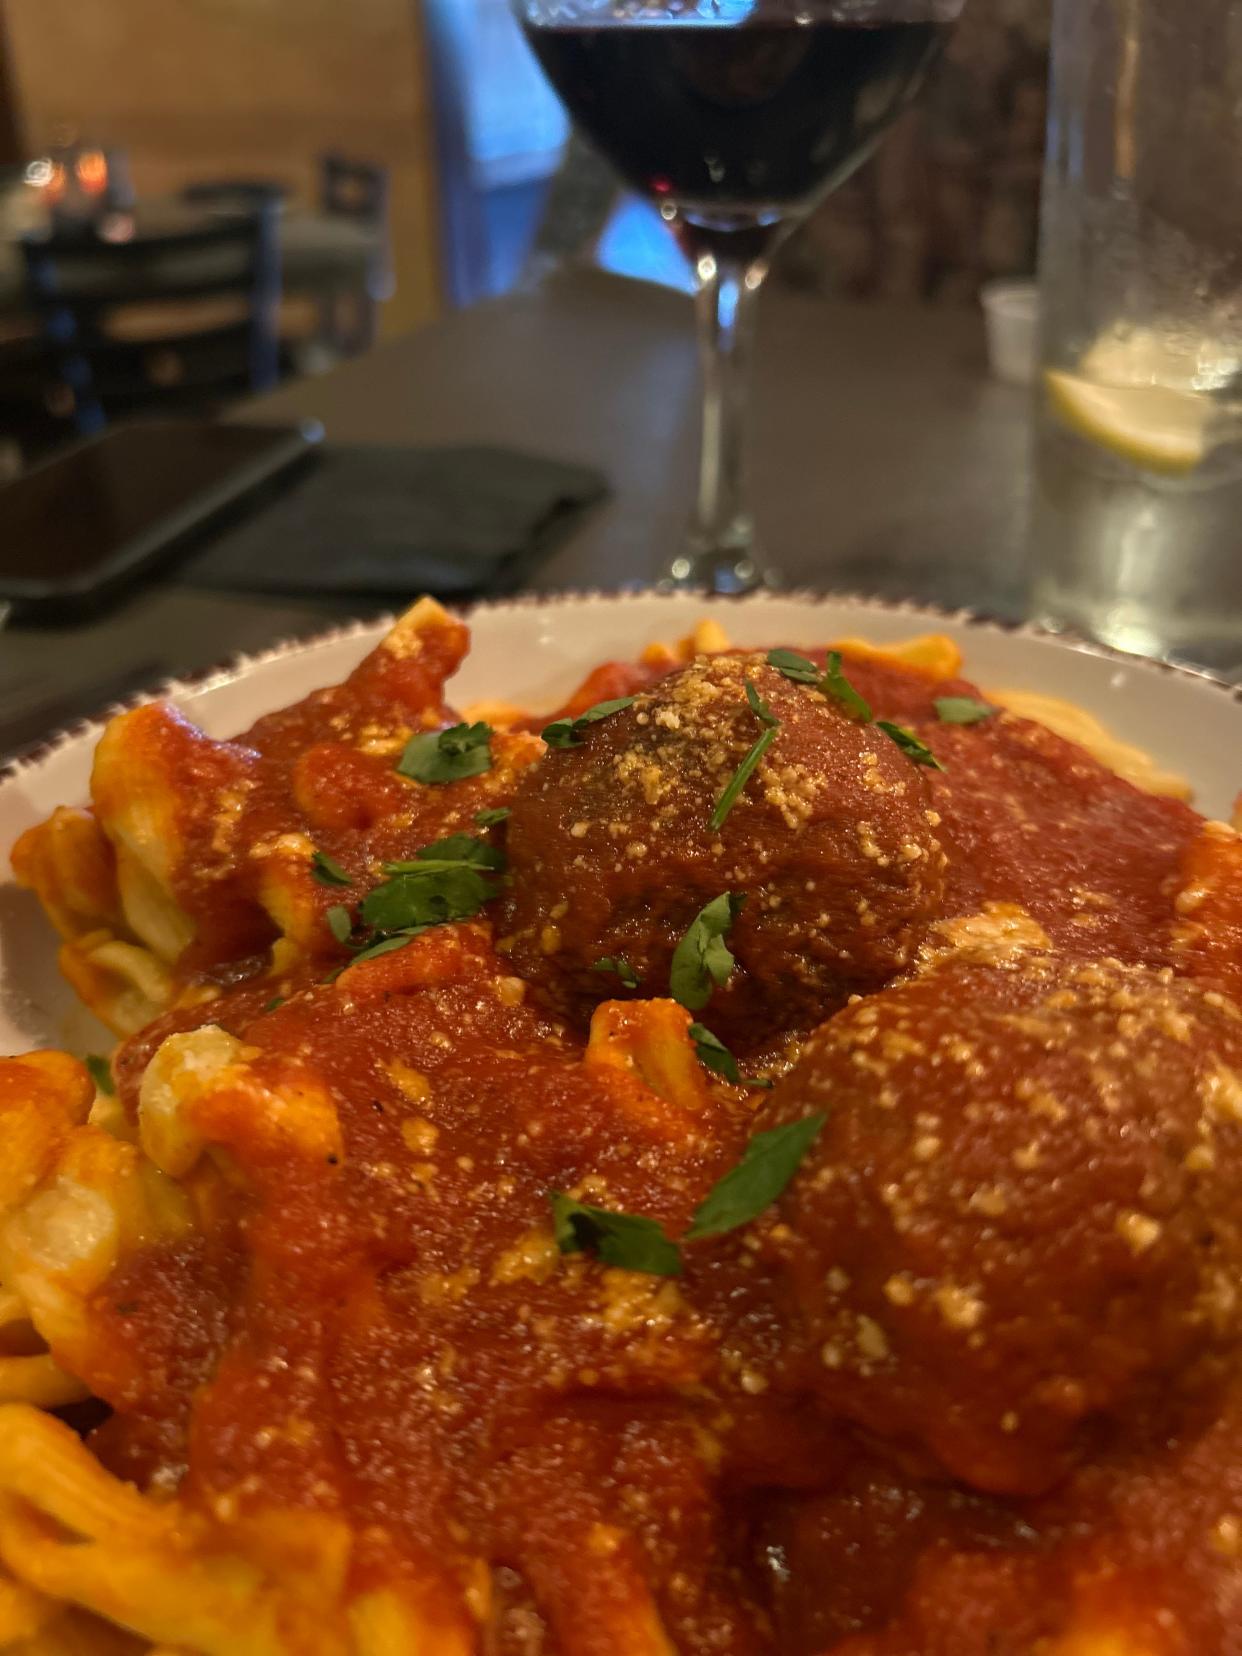 Cavatelli with meatballs and house tomato sauce as Santosuosso's restaurant in Medina Township.